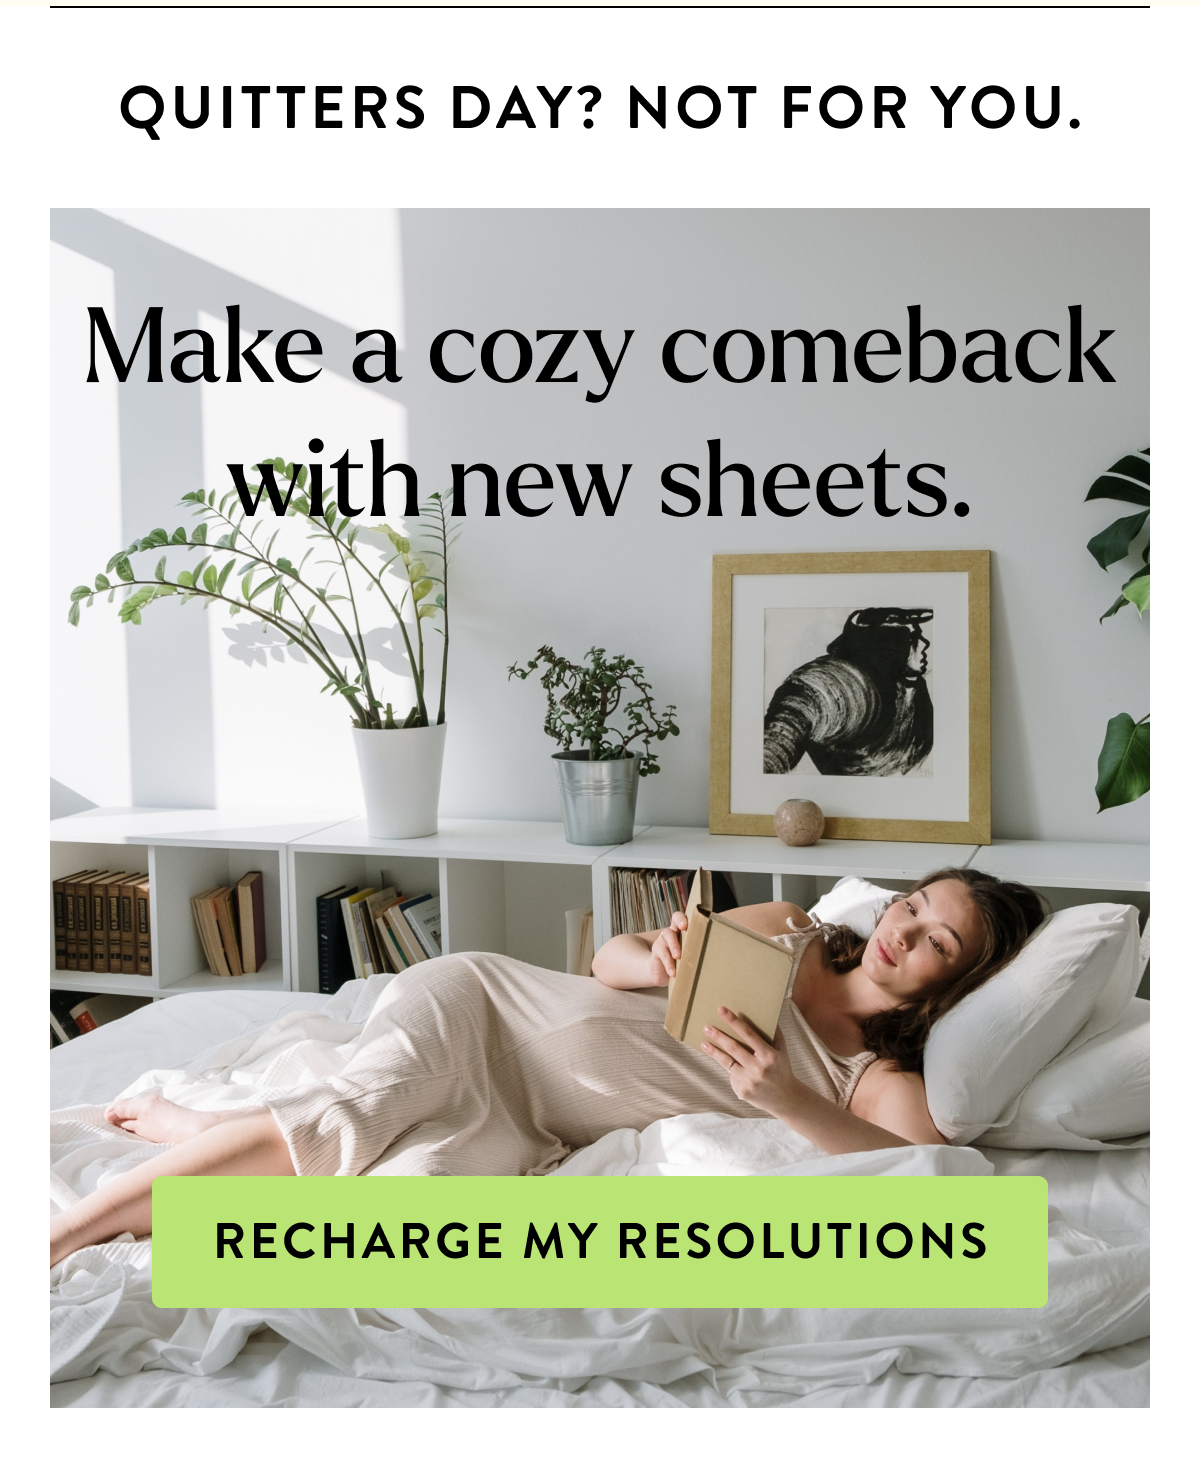 Quitters Day? Not For You. Make a cozy comeback with new sheets. [Recharge My Resolutions]